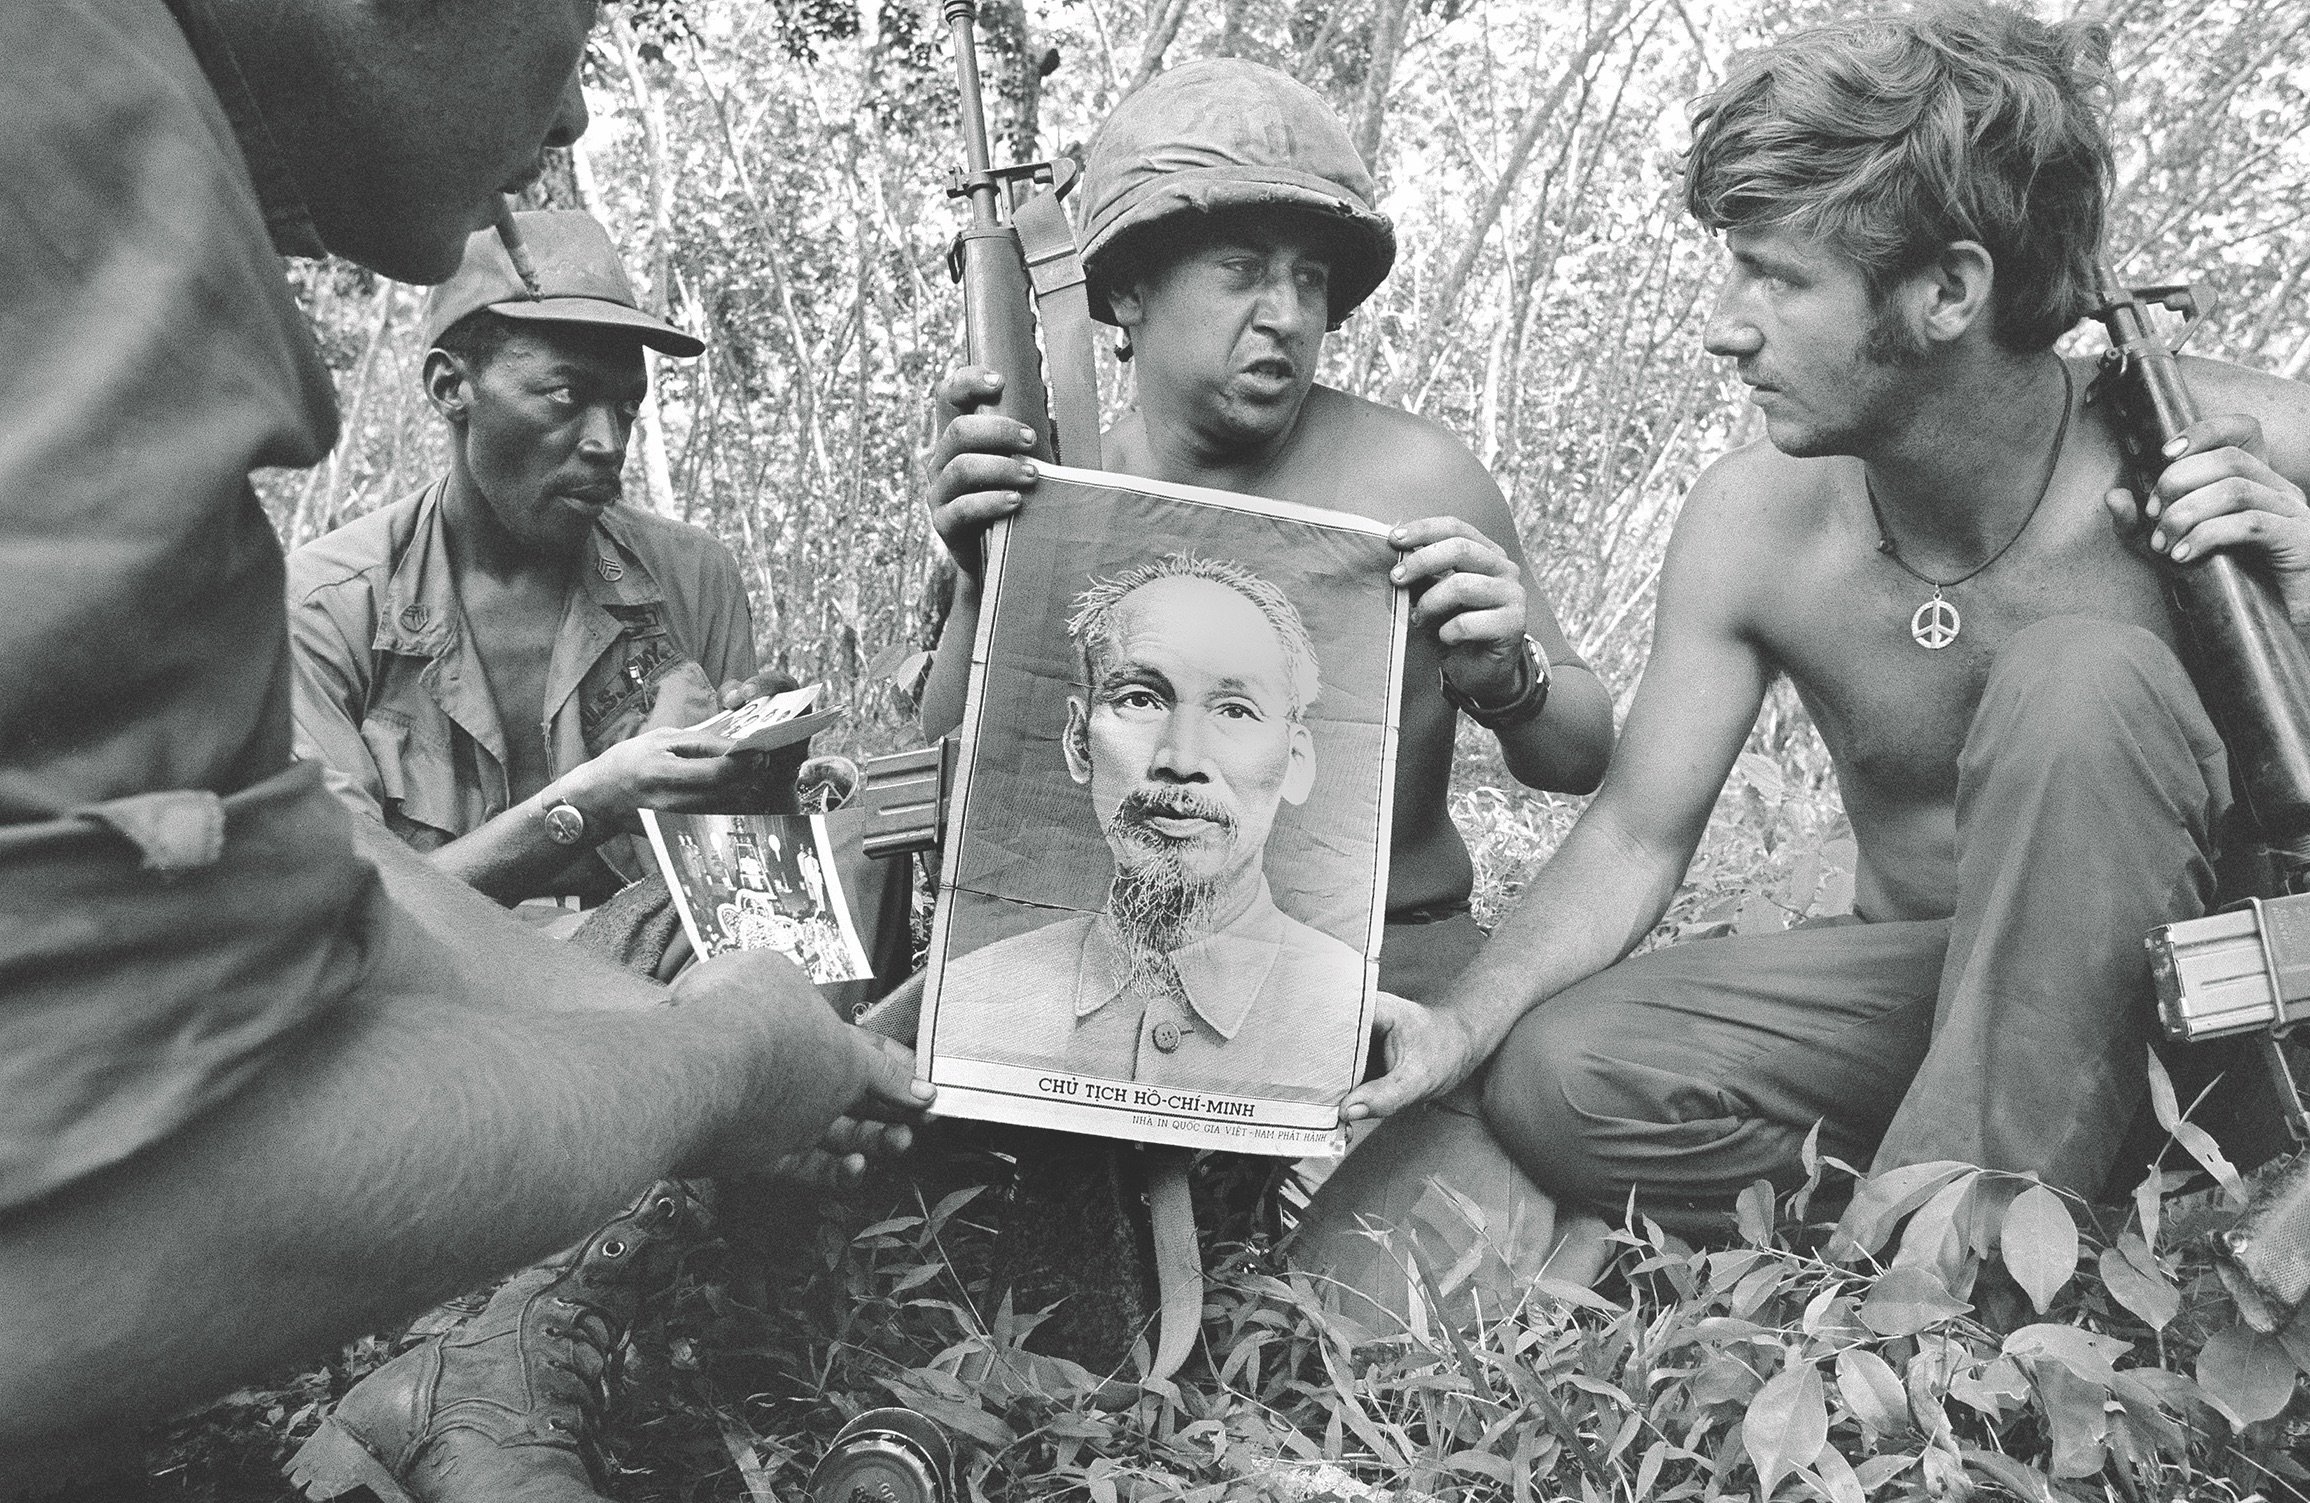 Behind the Mind of Ho Chi Minh